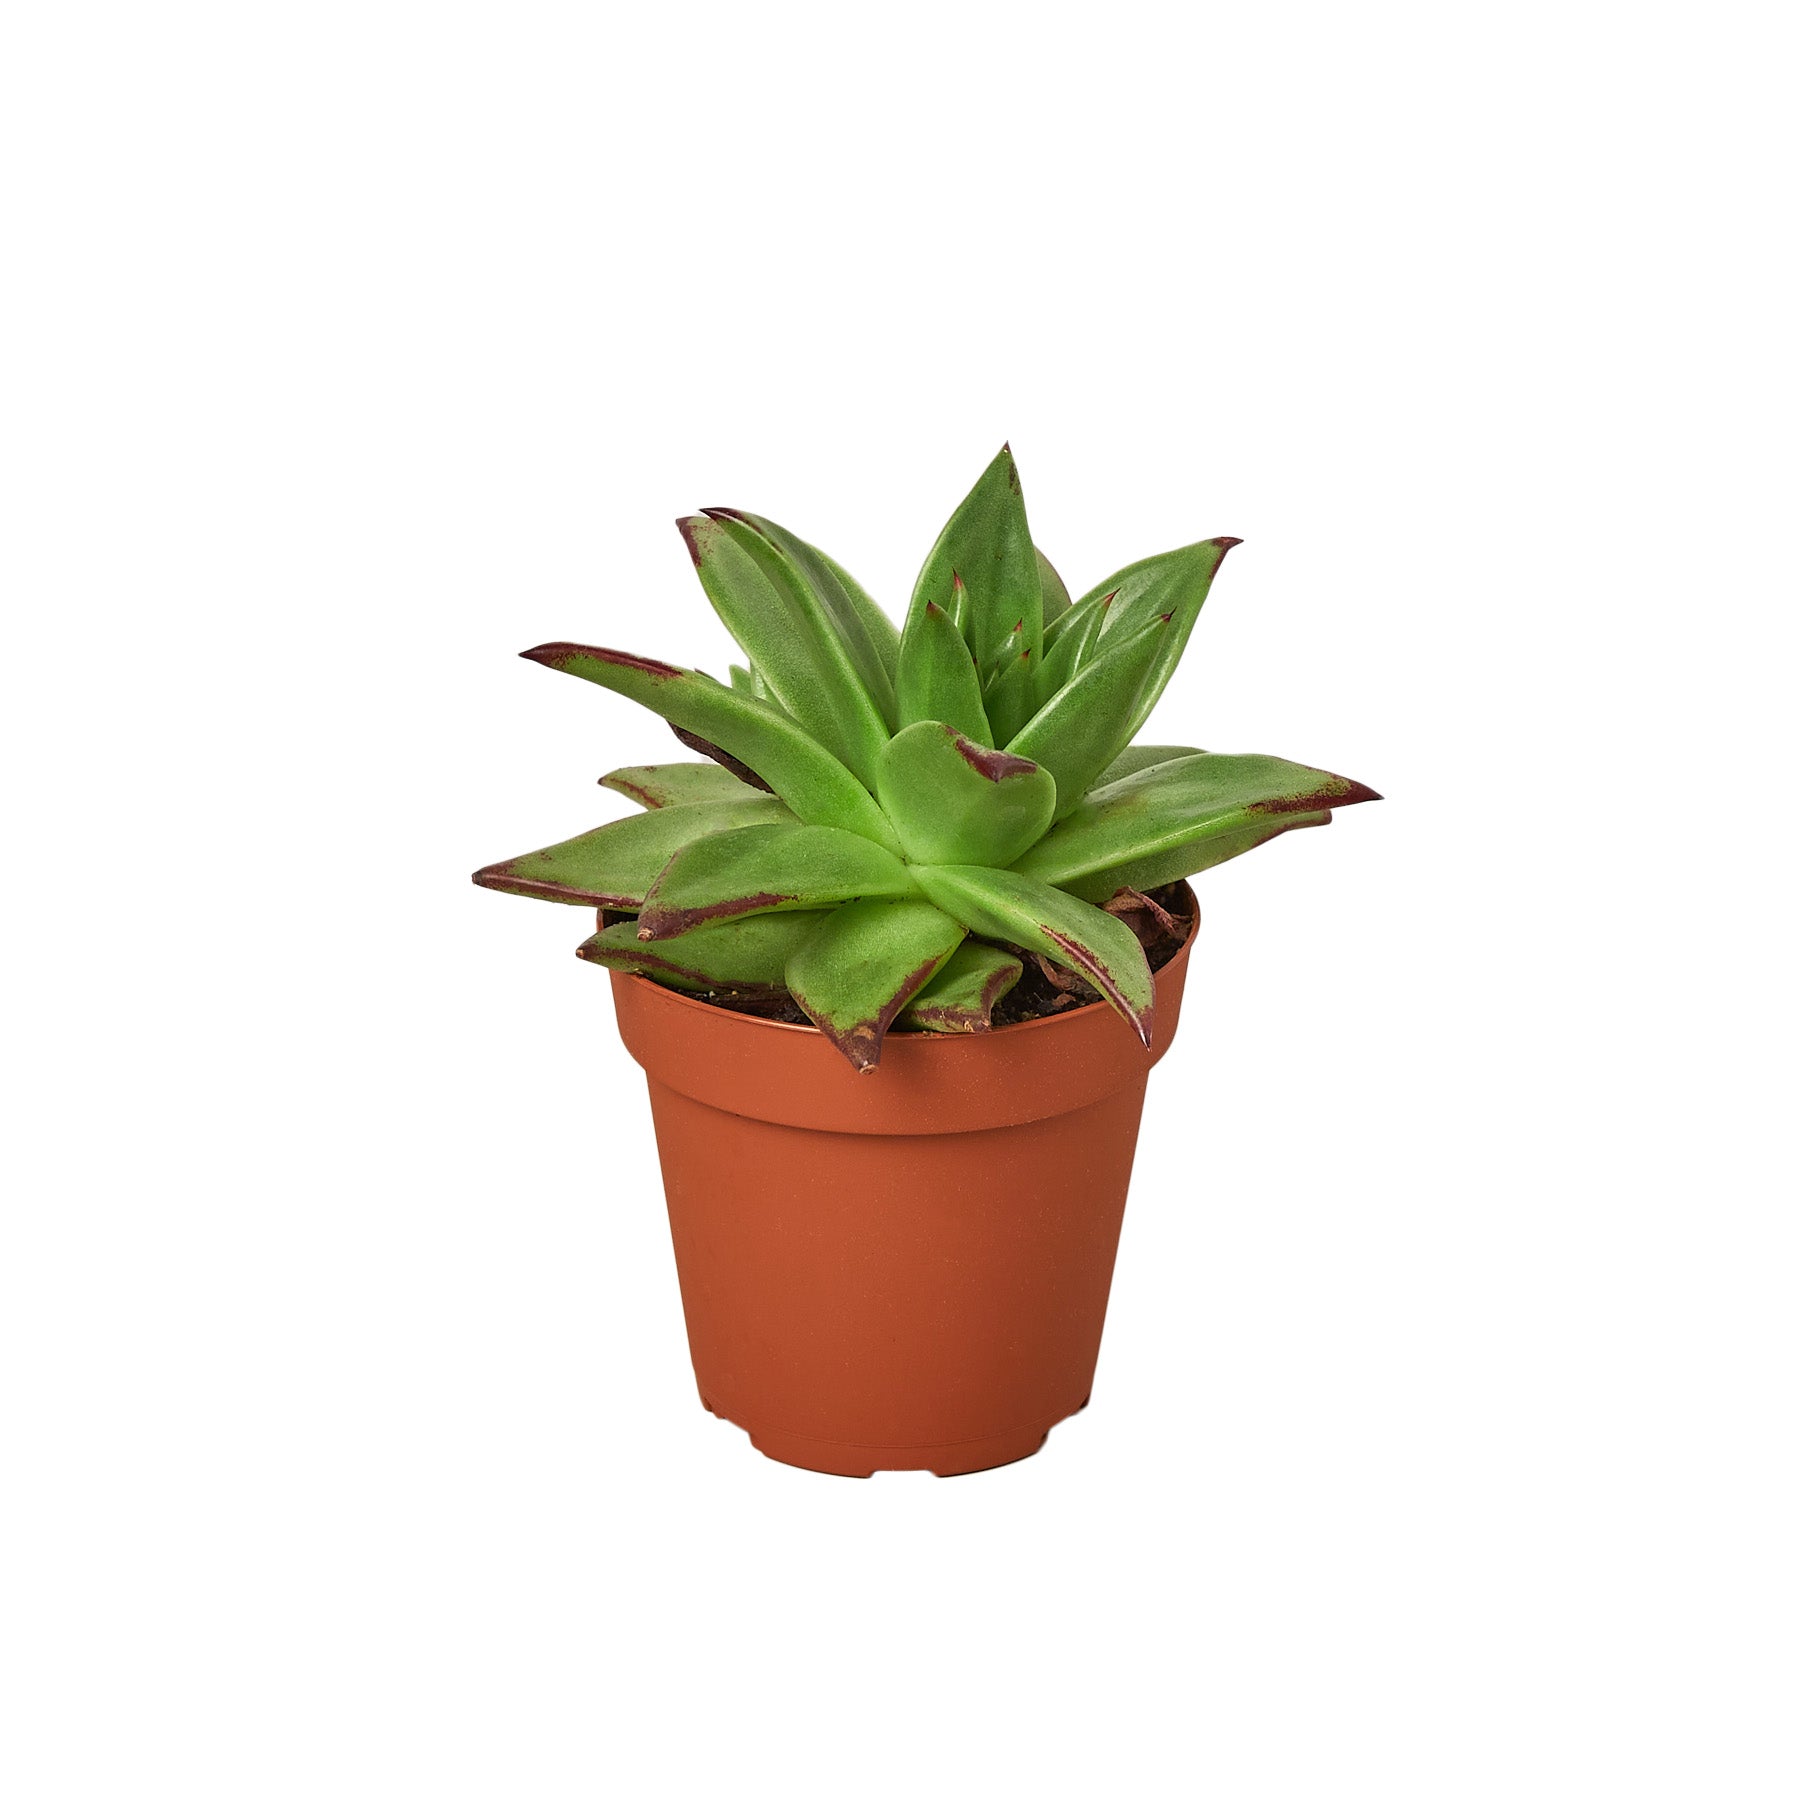 A small succulent plant in a pot on a white background, available for purchase at the best garden nursery near me.